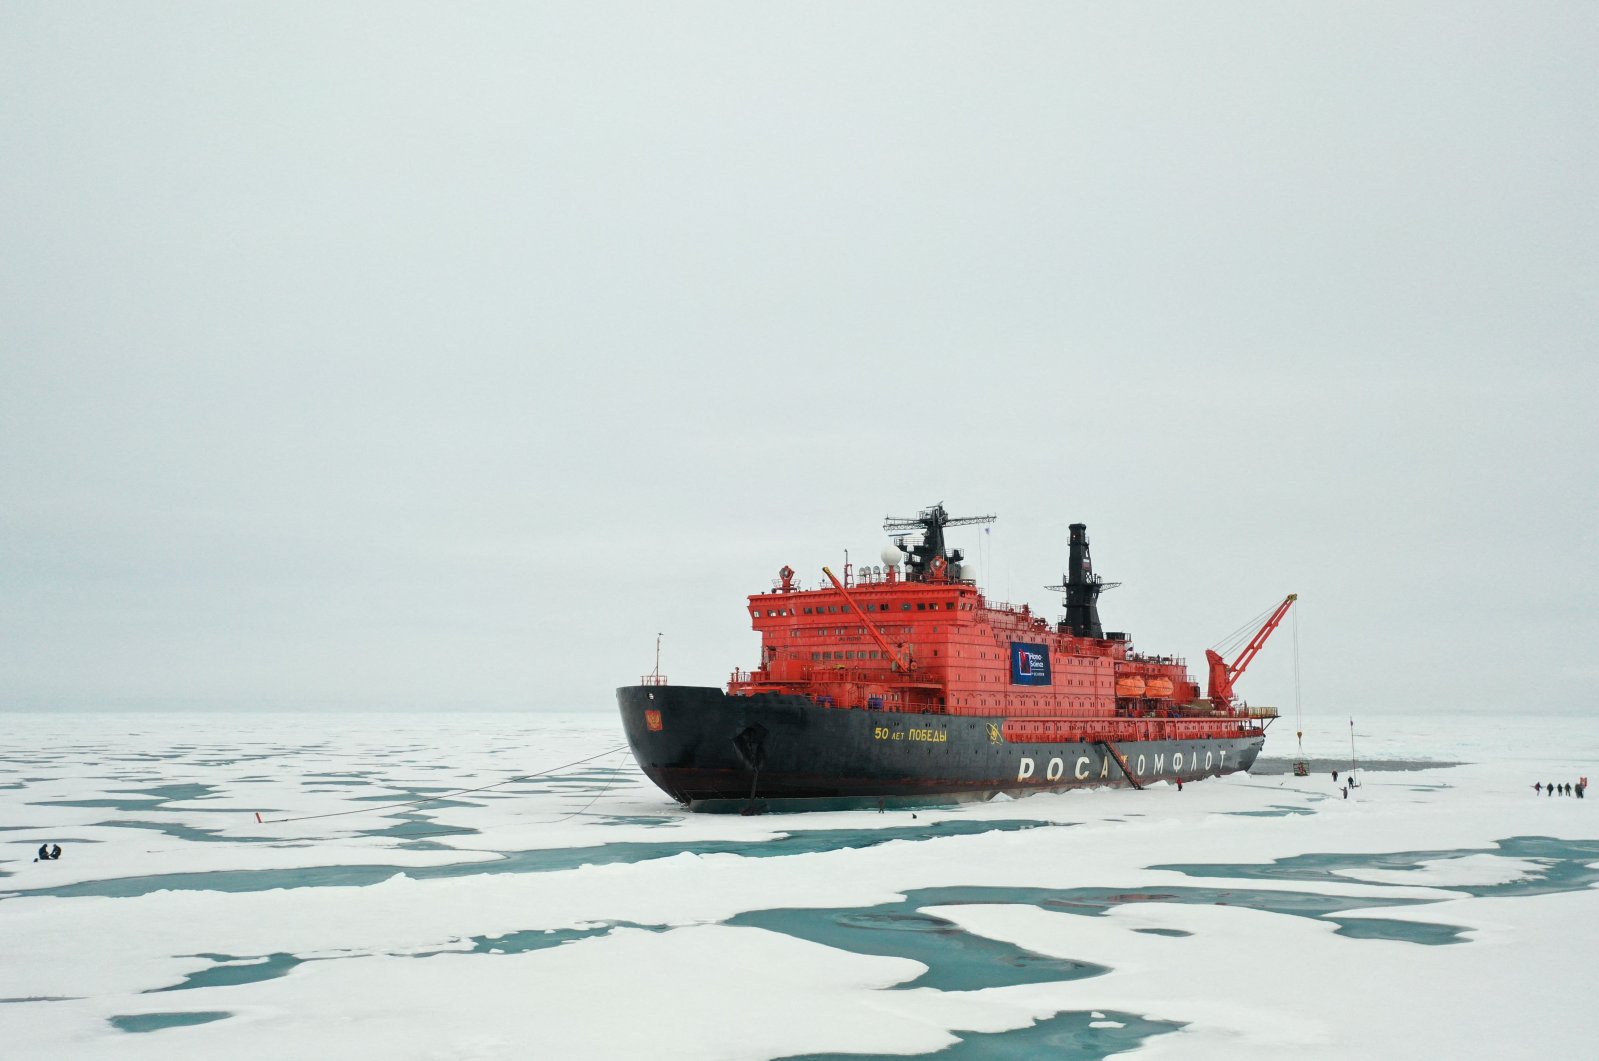 Russian icebreaker fleet poses as a warning on climate change | Daily Sabah - Daily Sabah